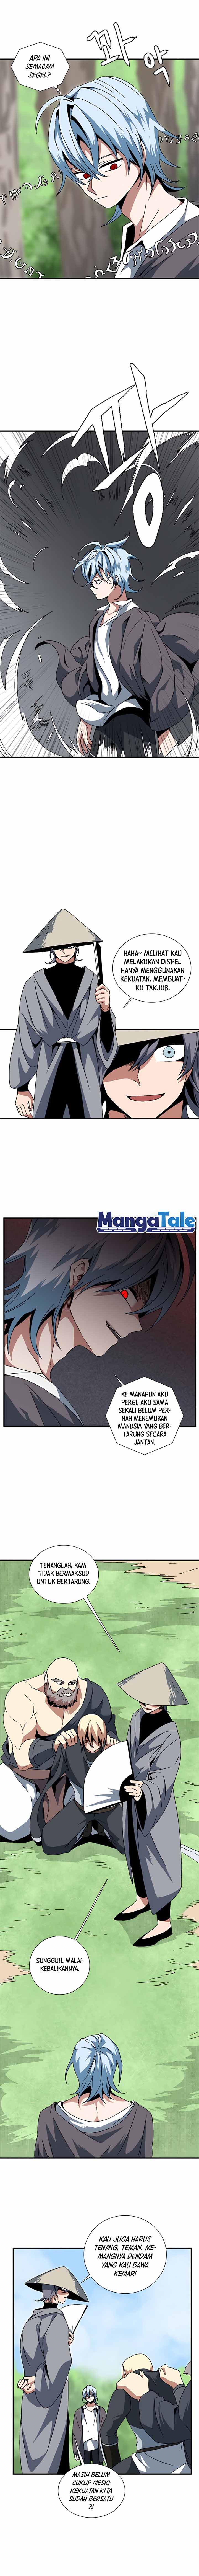 One Step to The Demon King Chapter 7